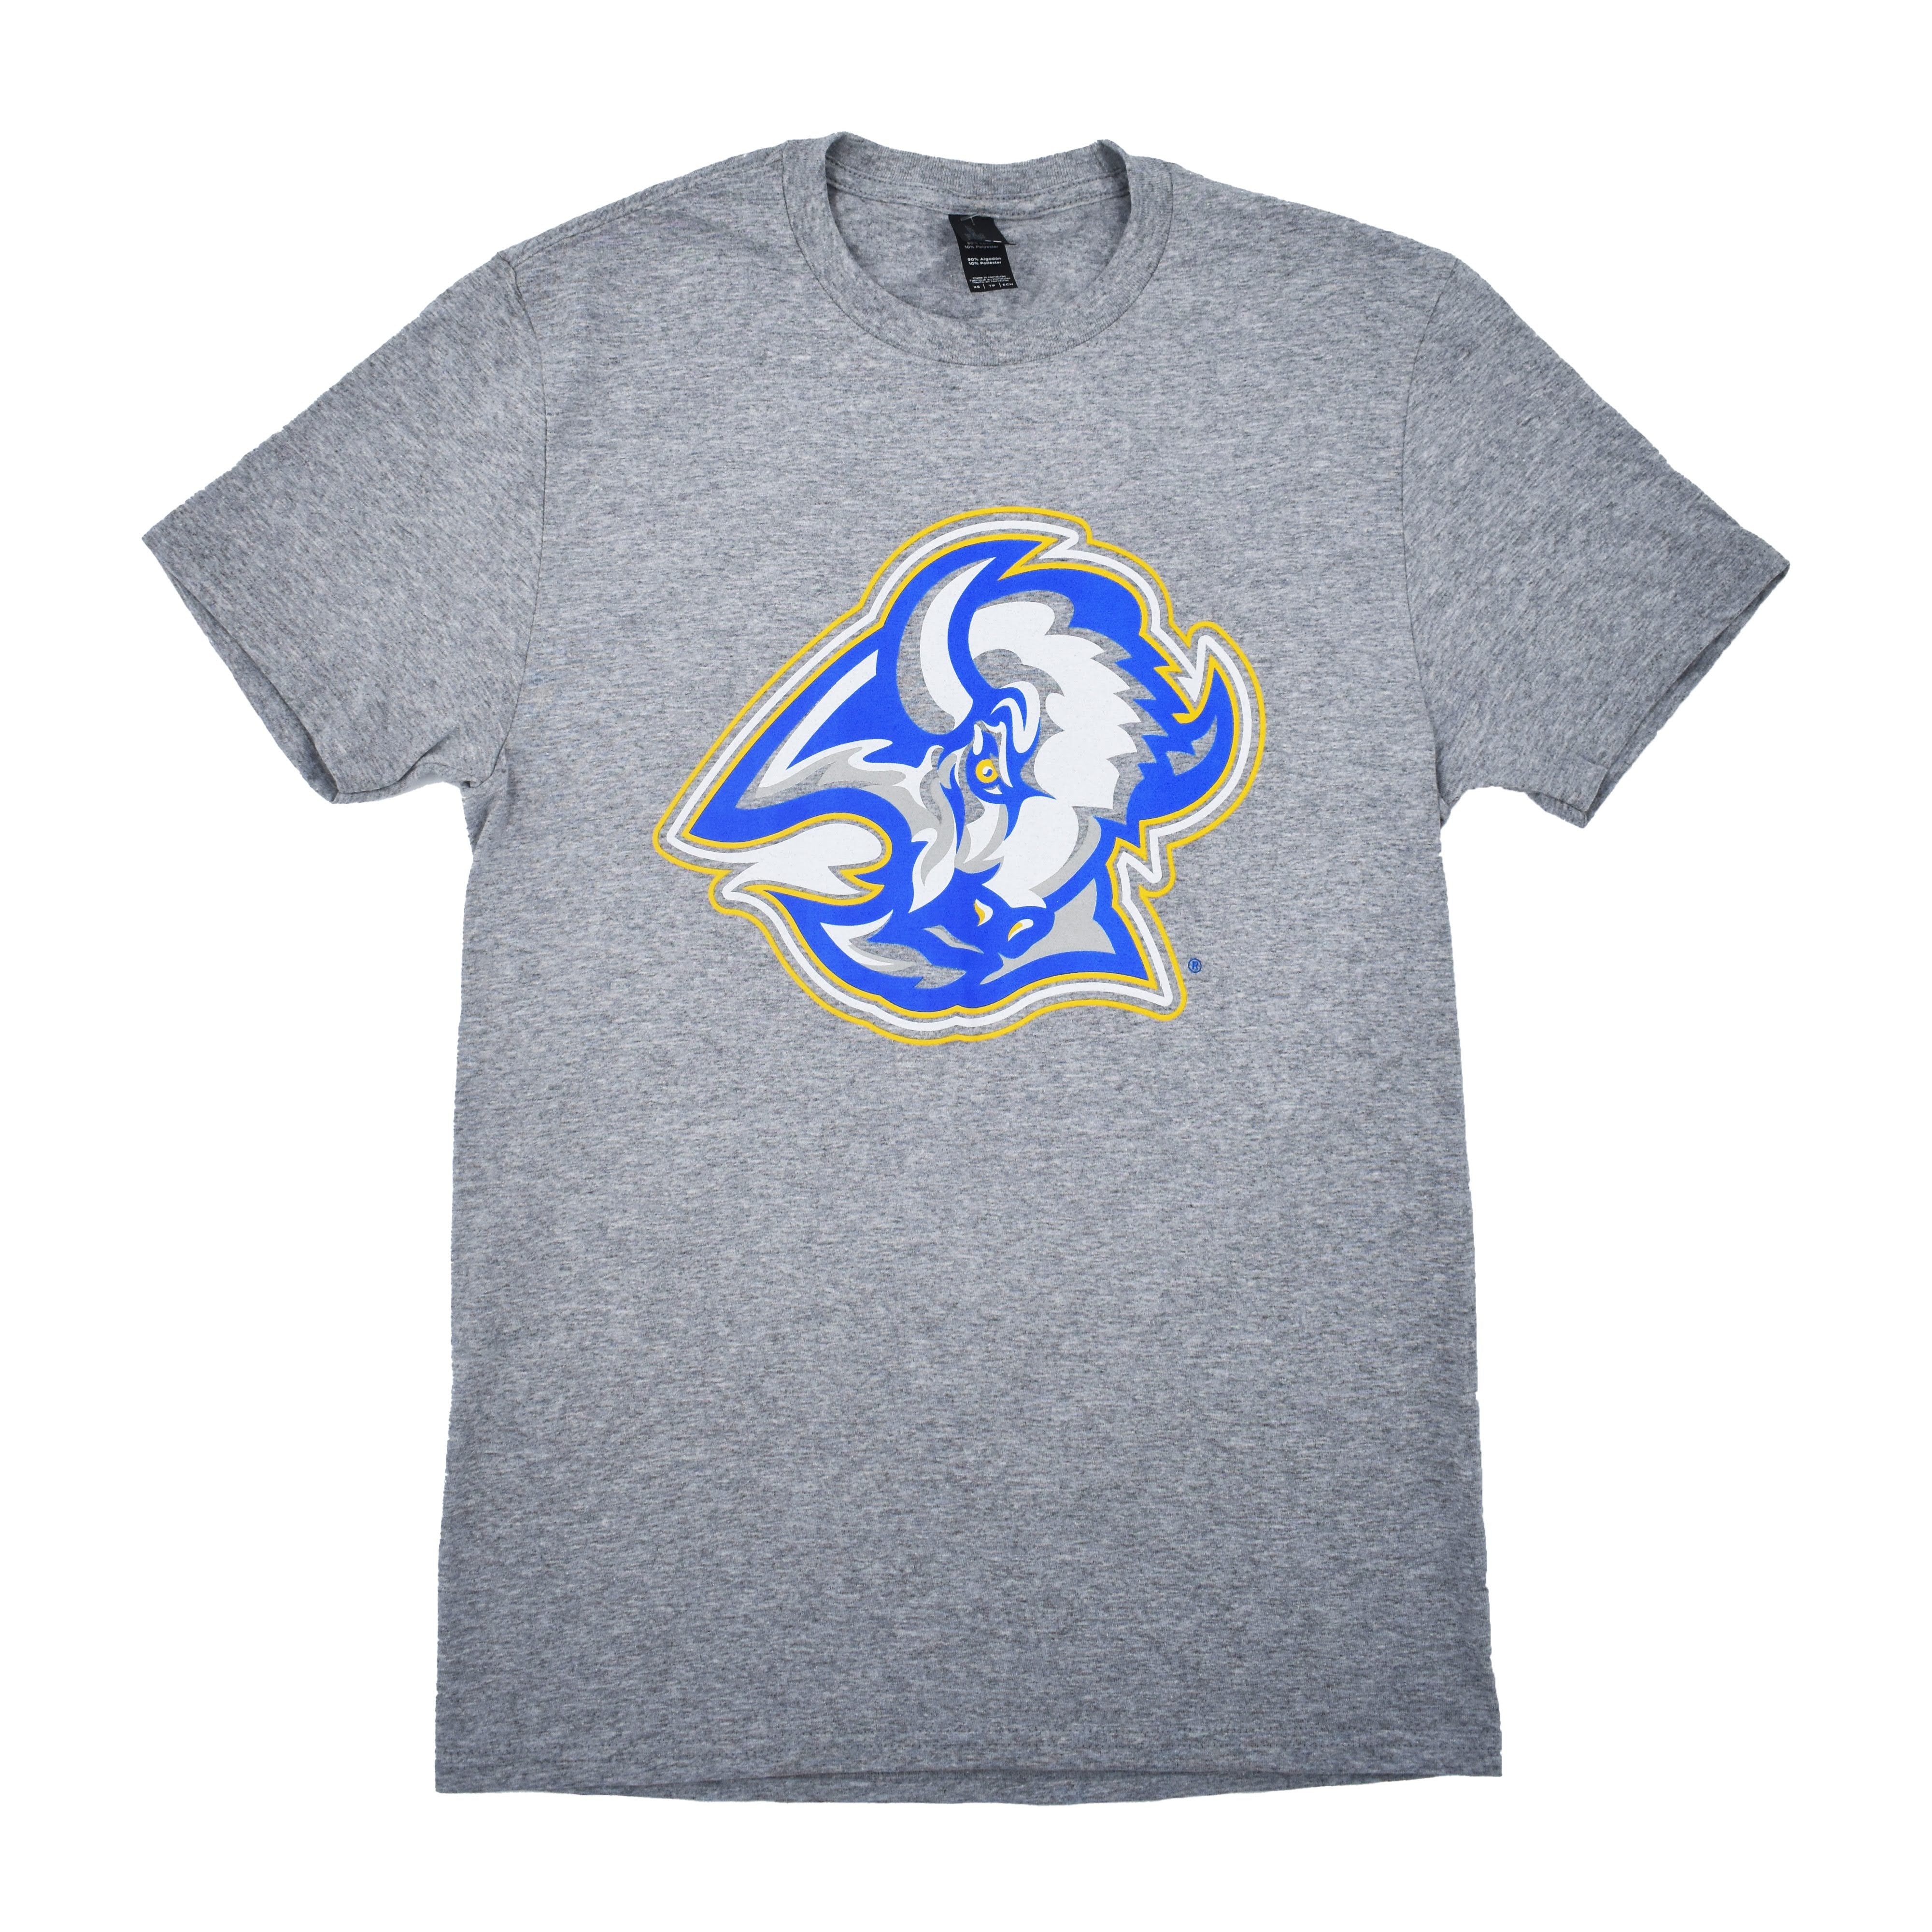 Buffalo sabres blue and gold goat head shirt - Peanutstee